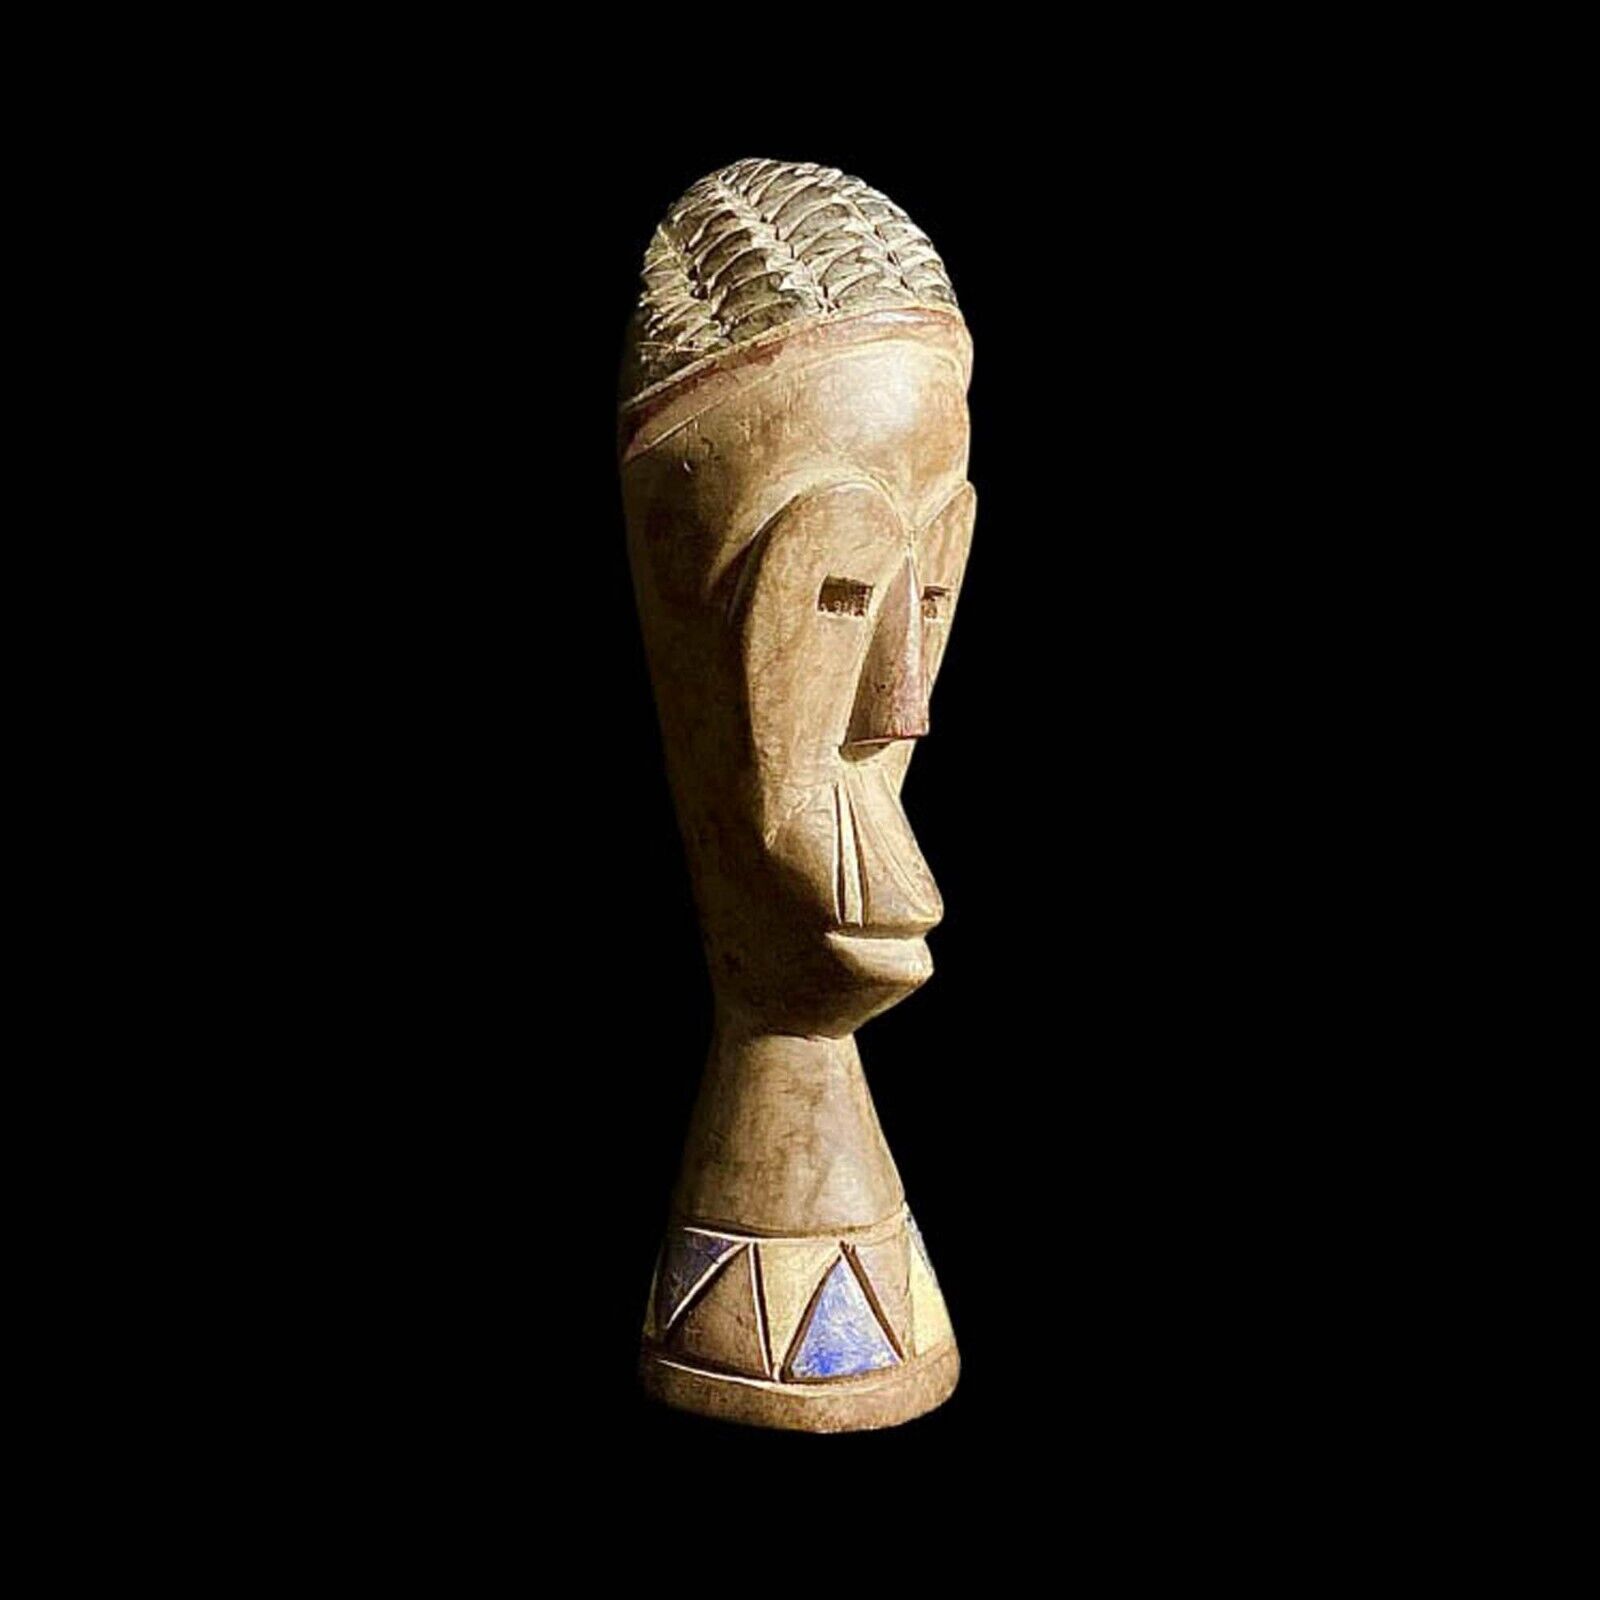 African Handmade Figurine, Made Of Wood, And Stands On Its Own Dan Tribe-7426